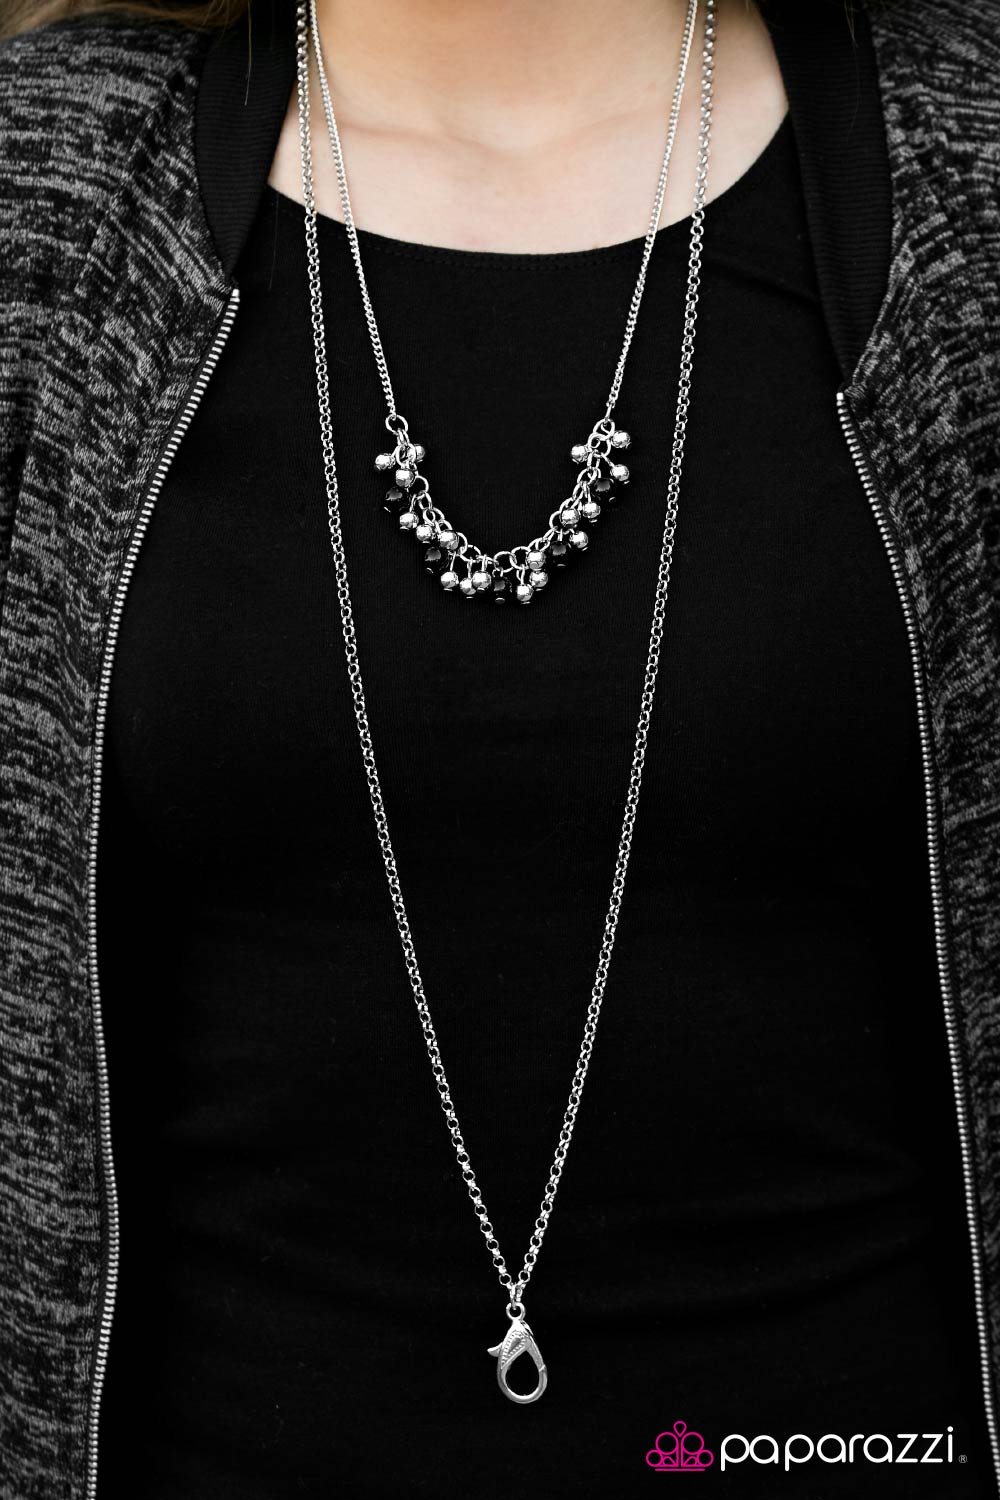 Runway Sparkle Black Necklace - Paparazzi Accessories- lightbox - CarasShop.com - $5 Jewelry by Cara Jewels